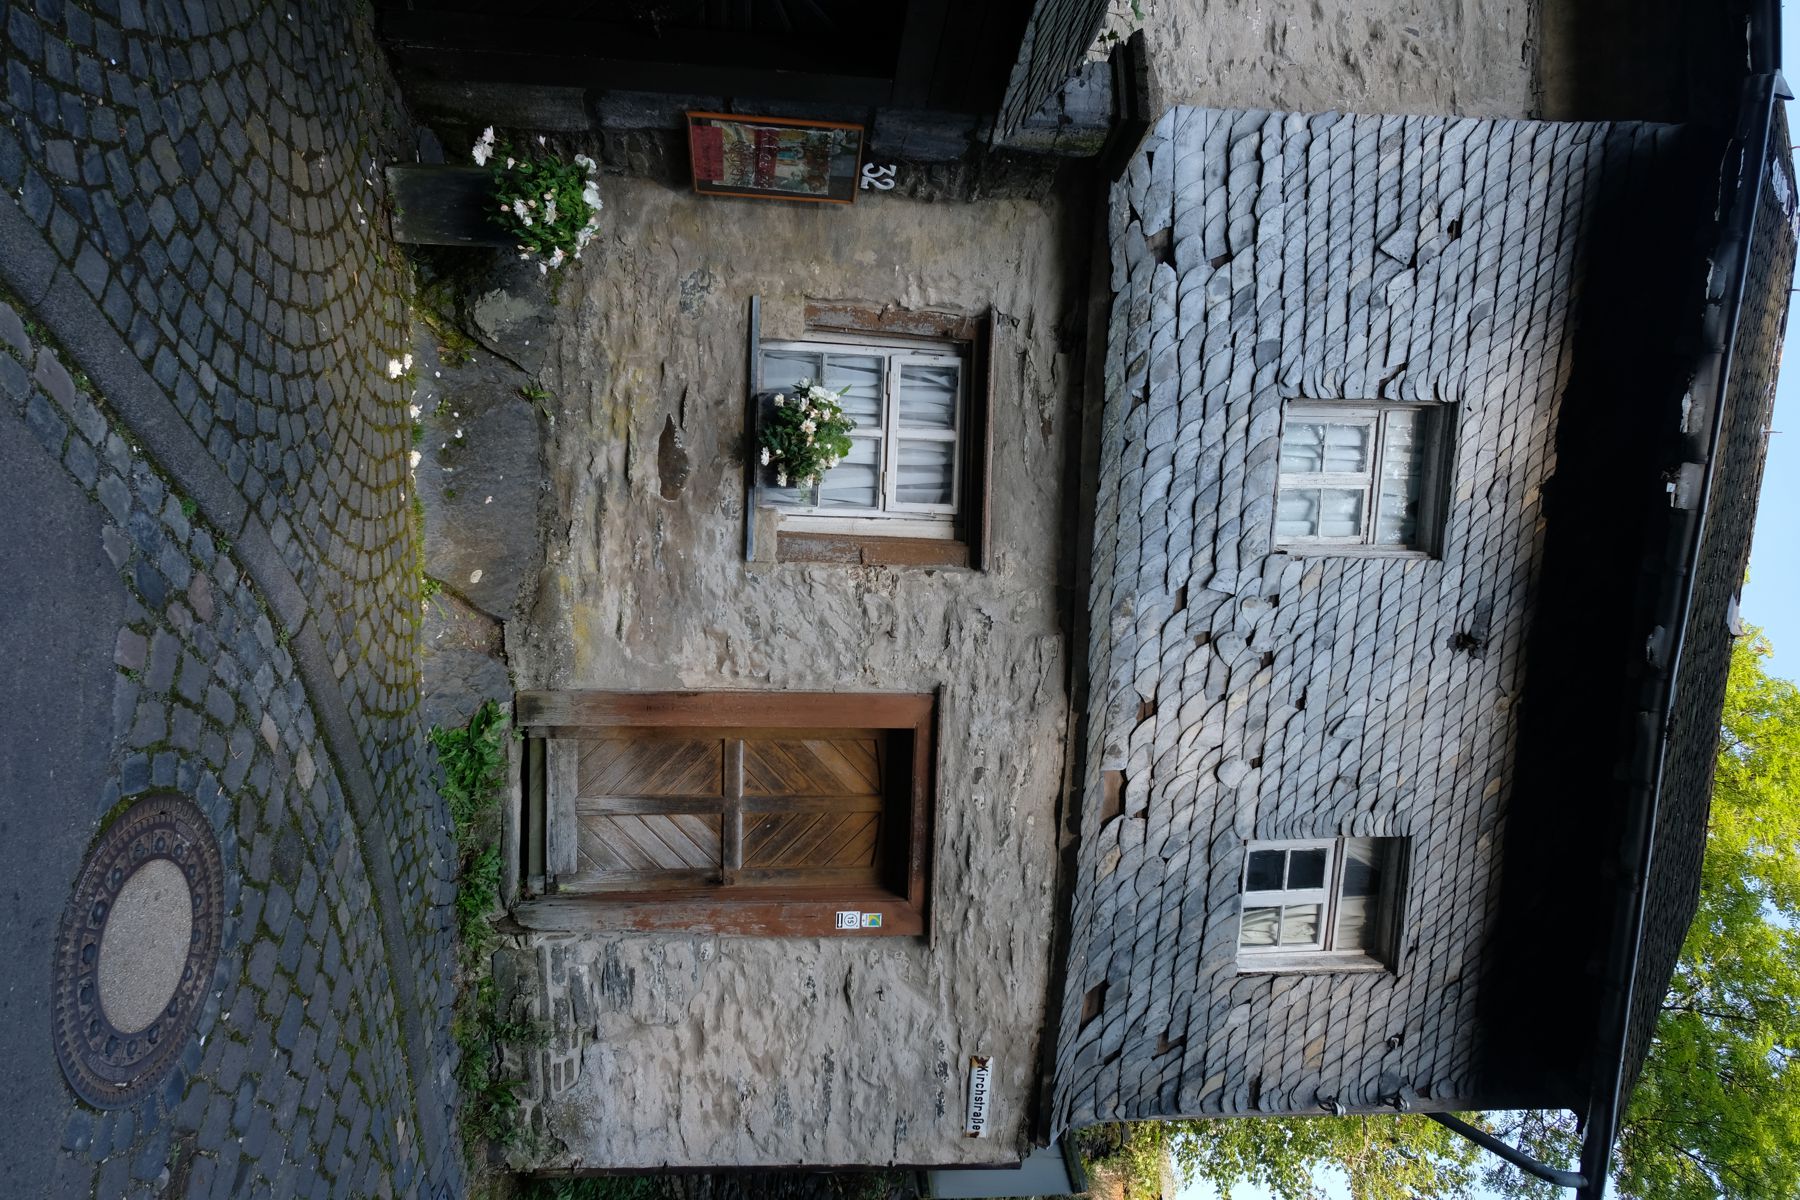 Monschau - the seedy part of the town.